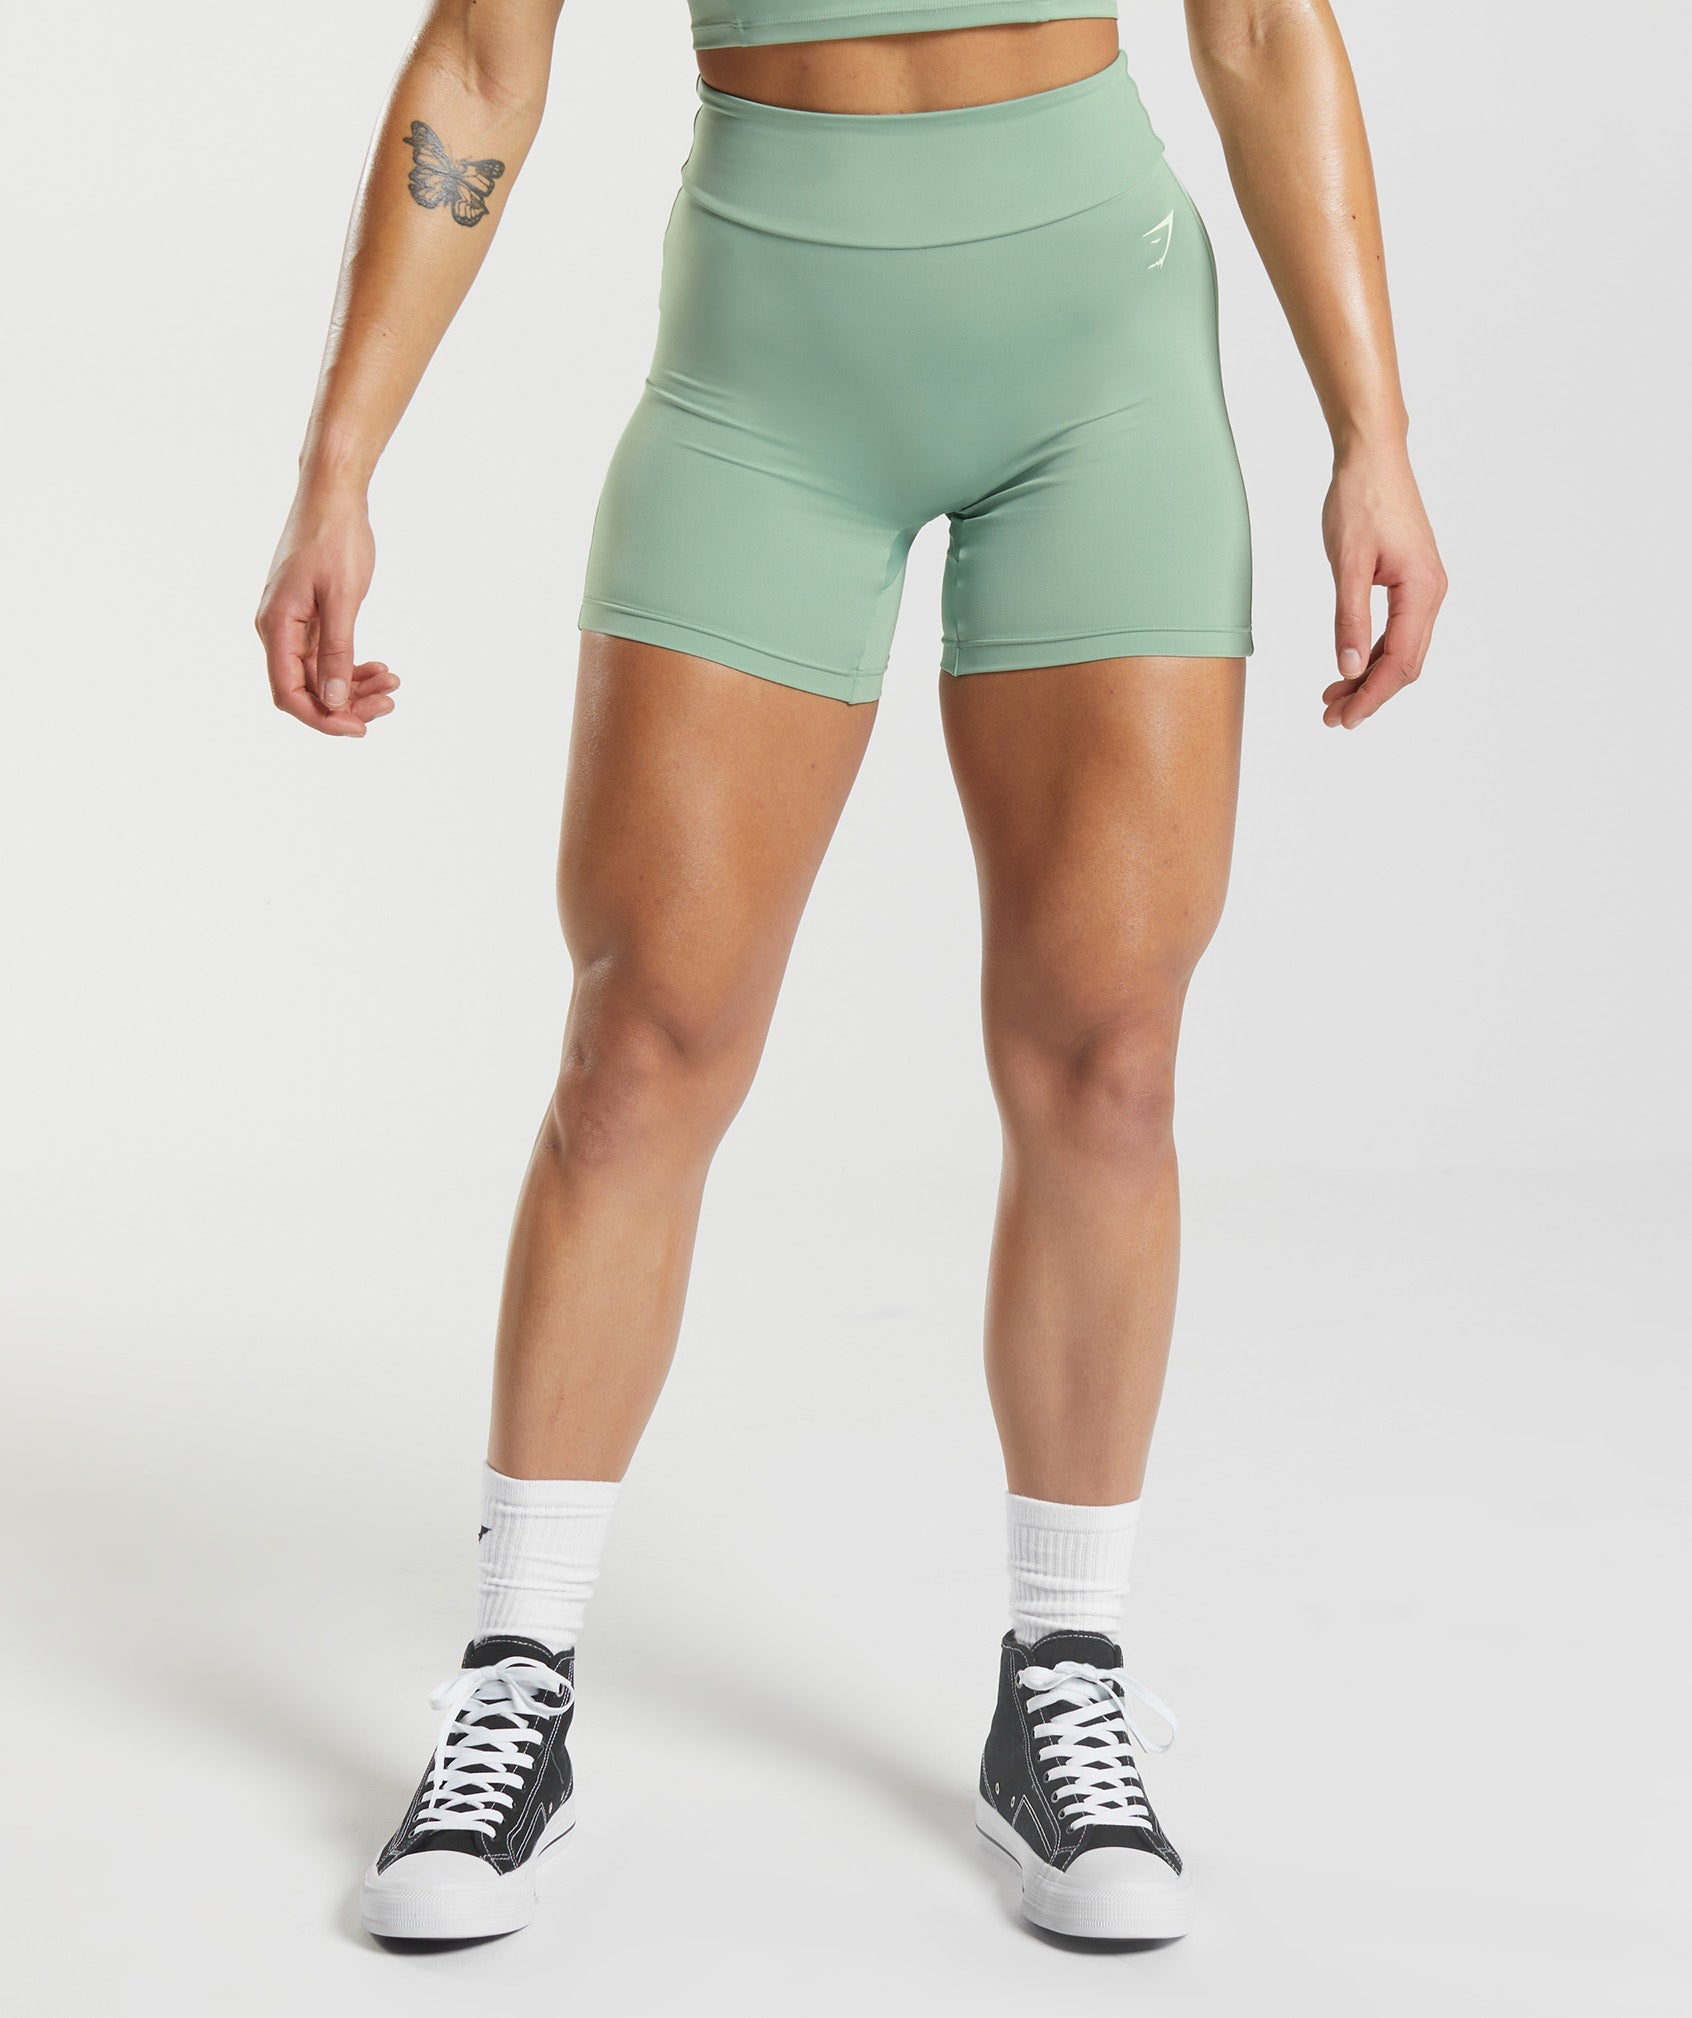 Gymshark Womens S Teal Green Apex Seamless Workout Gym Shorts